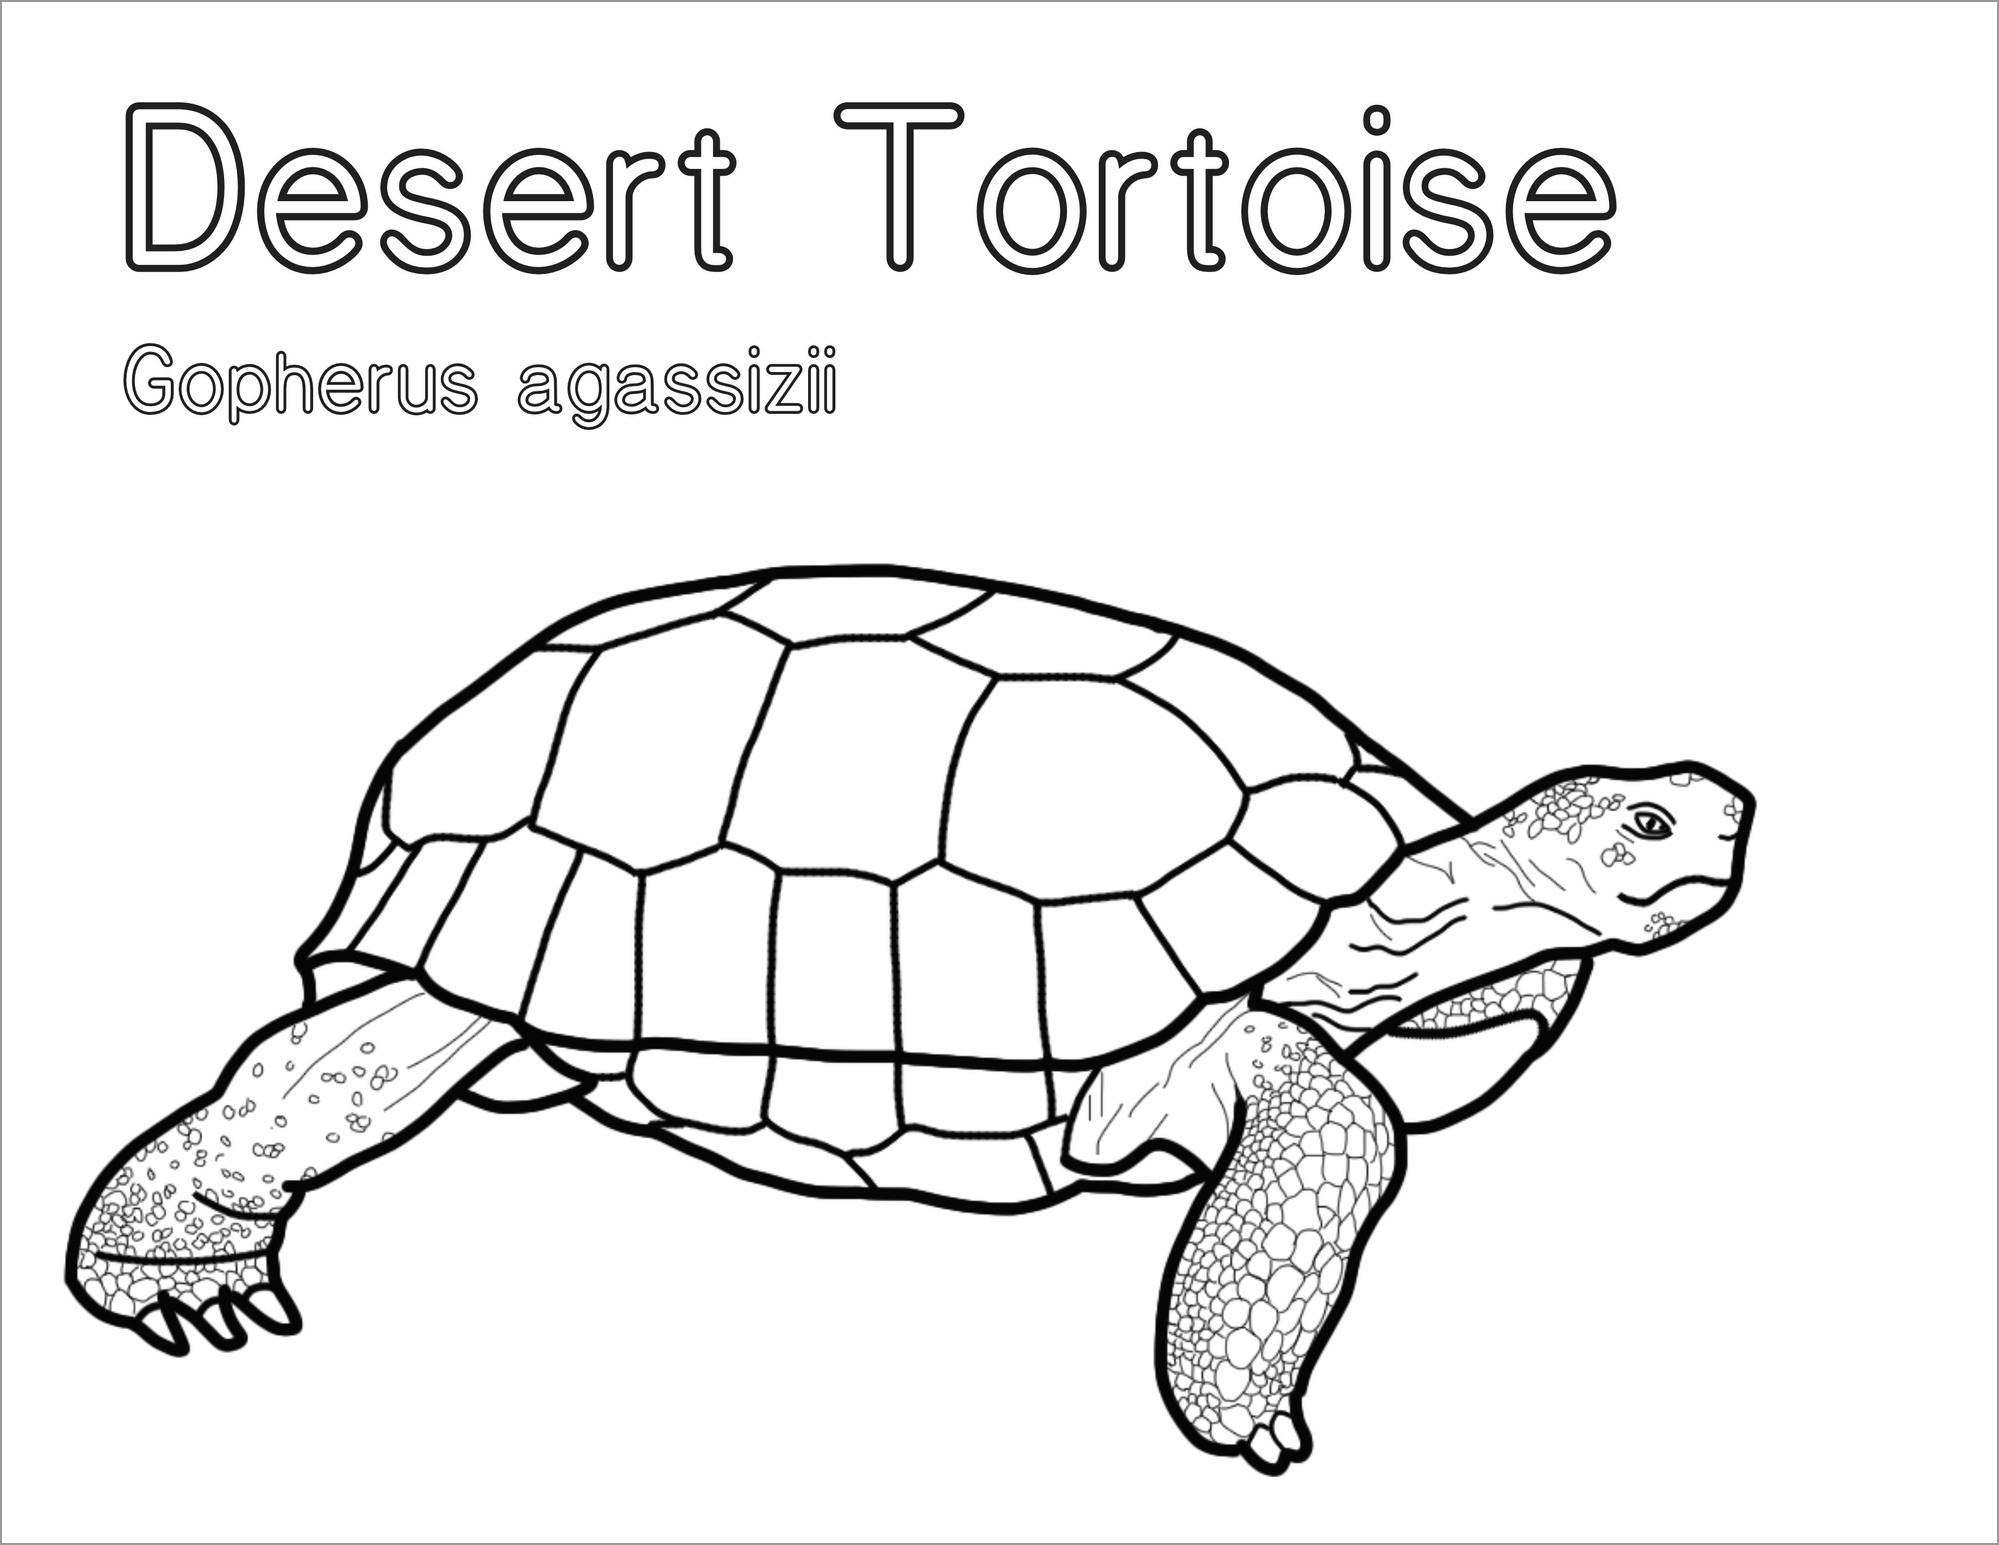 Desert tortoise Coloring Page to Print